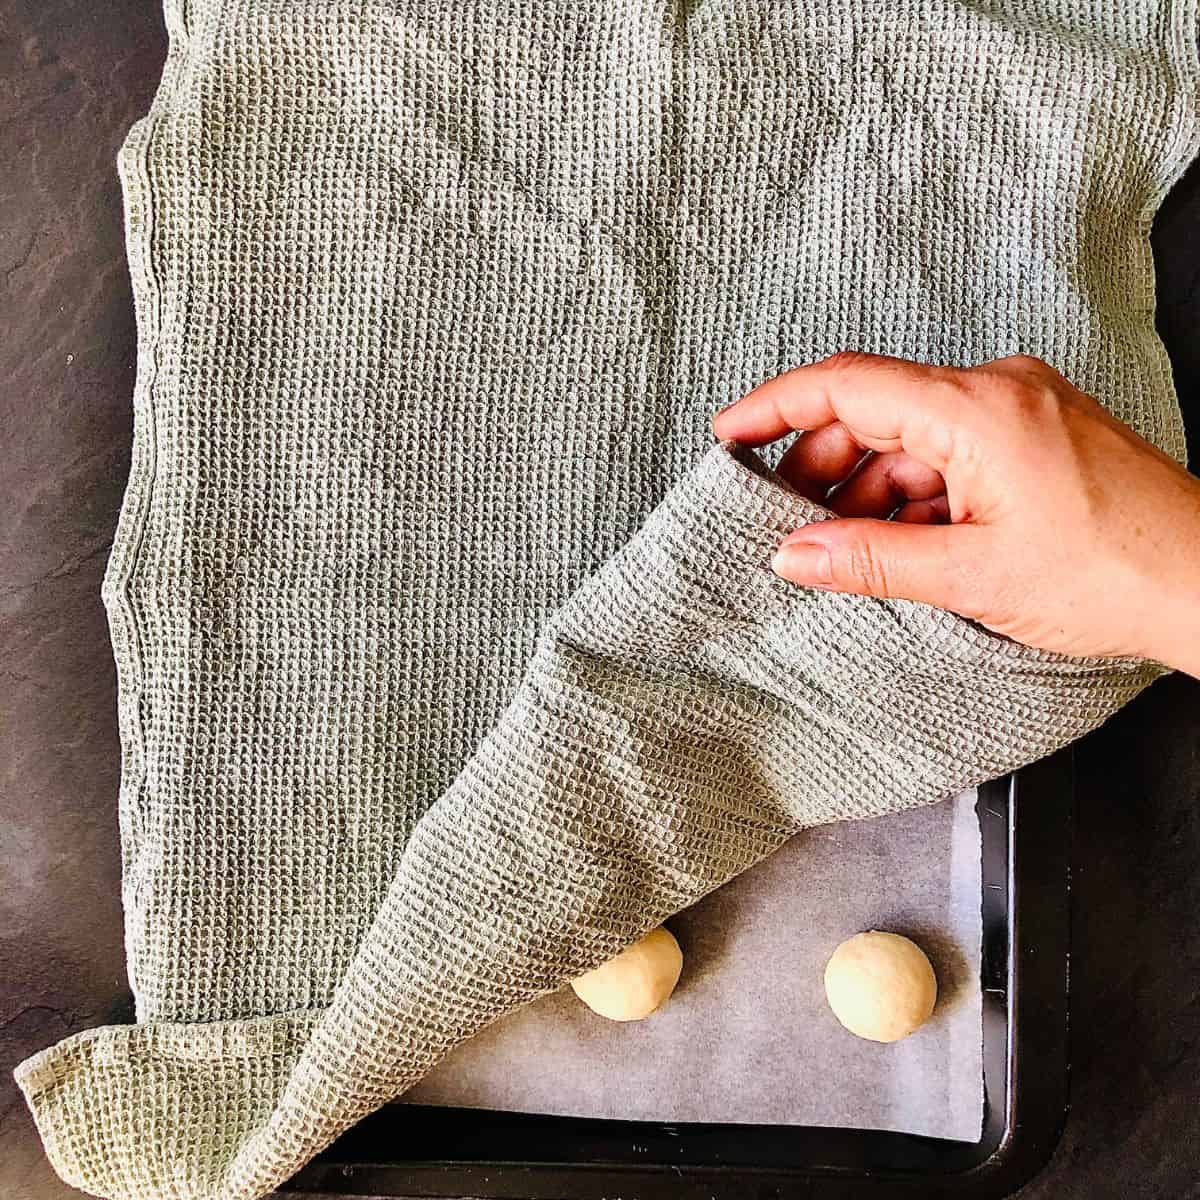 Small brioche bun dough balls on a baking tray, covered with a tea towel lifted at one edge by a hand, showing two dough balls, ready to prove.